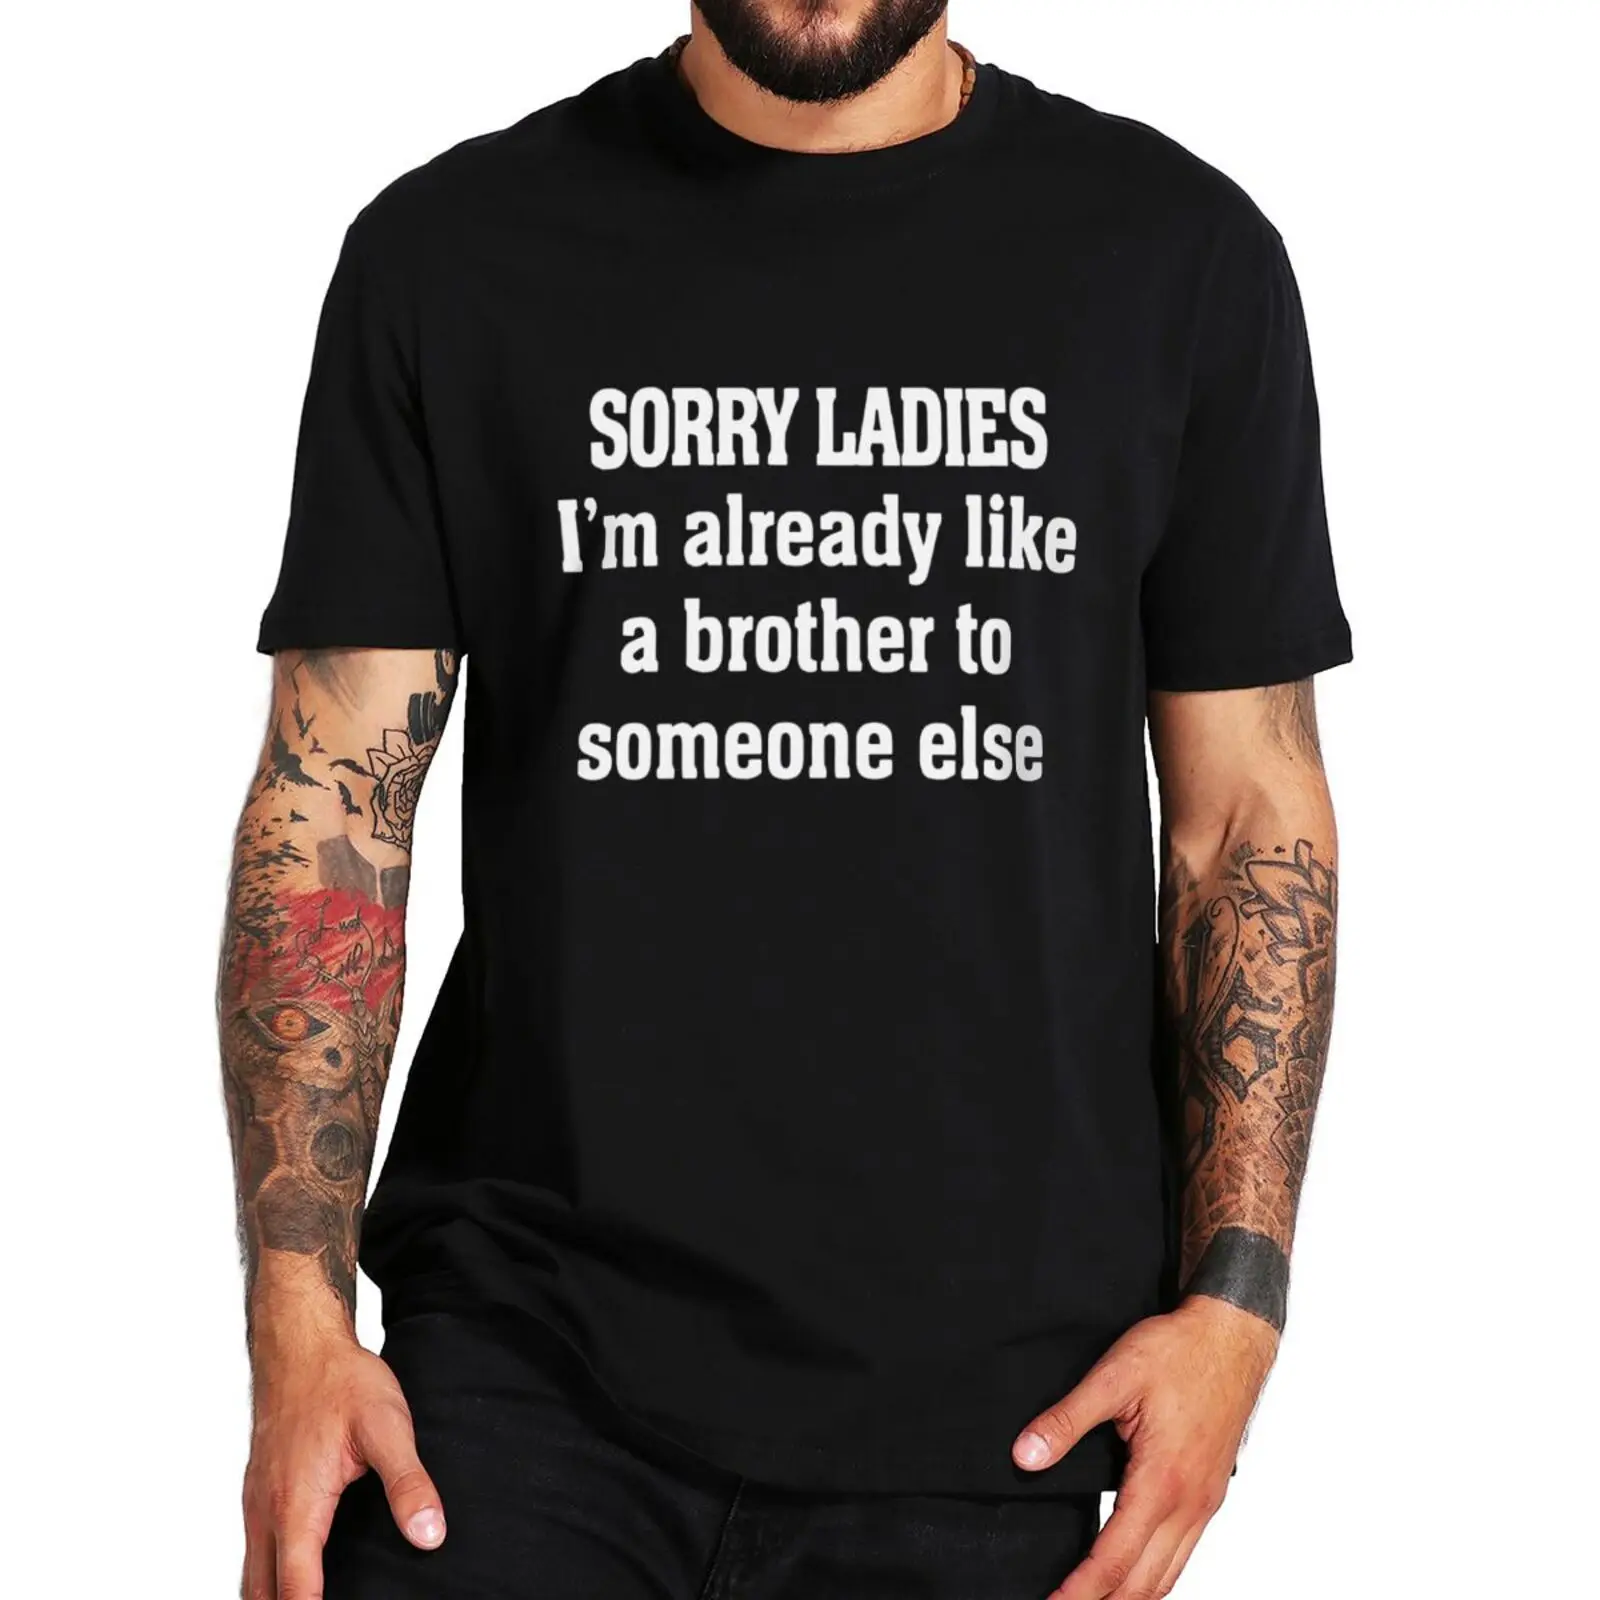 

Sorry Ladies Im Already Like A Brother To Someone Else T Shirt Funny Adult Humor Weird T-shirt 100% Cotton Unisex Tops EU Size